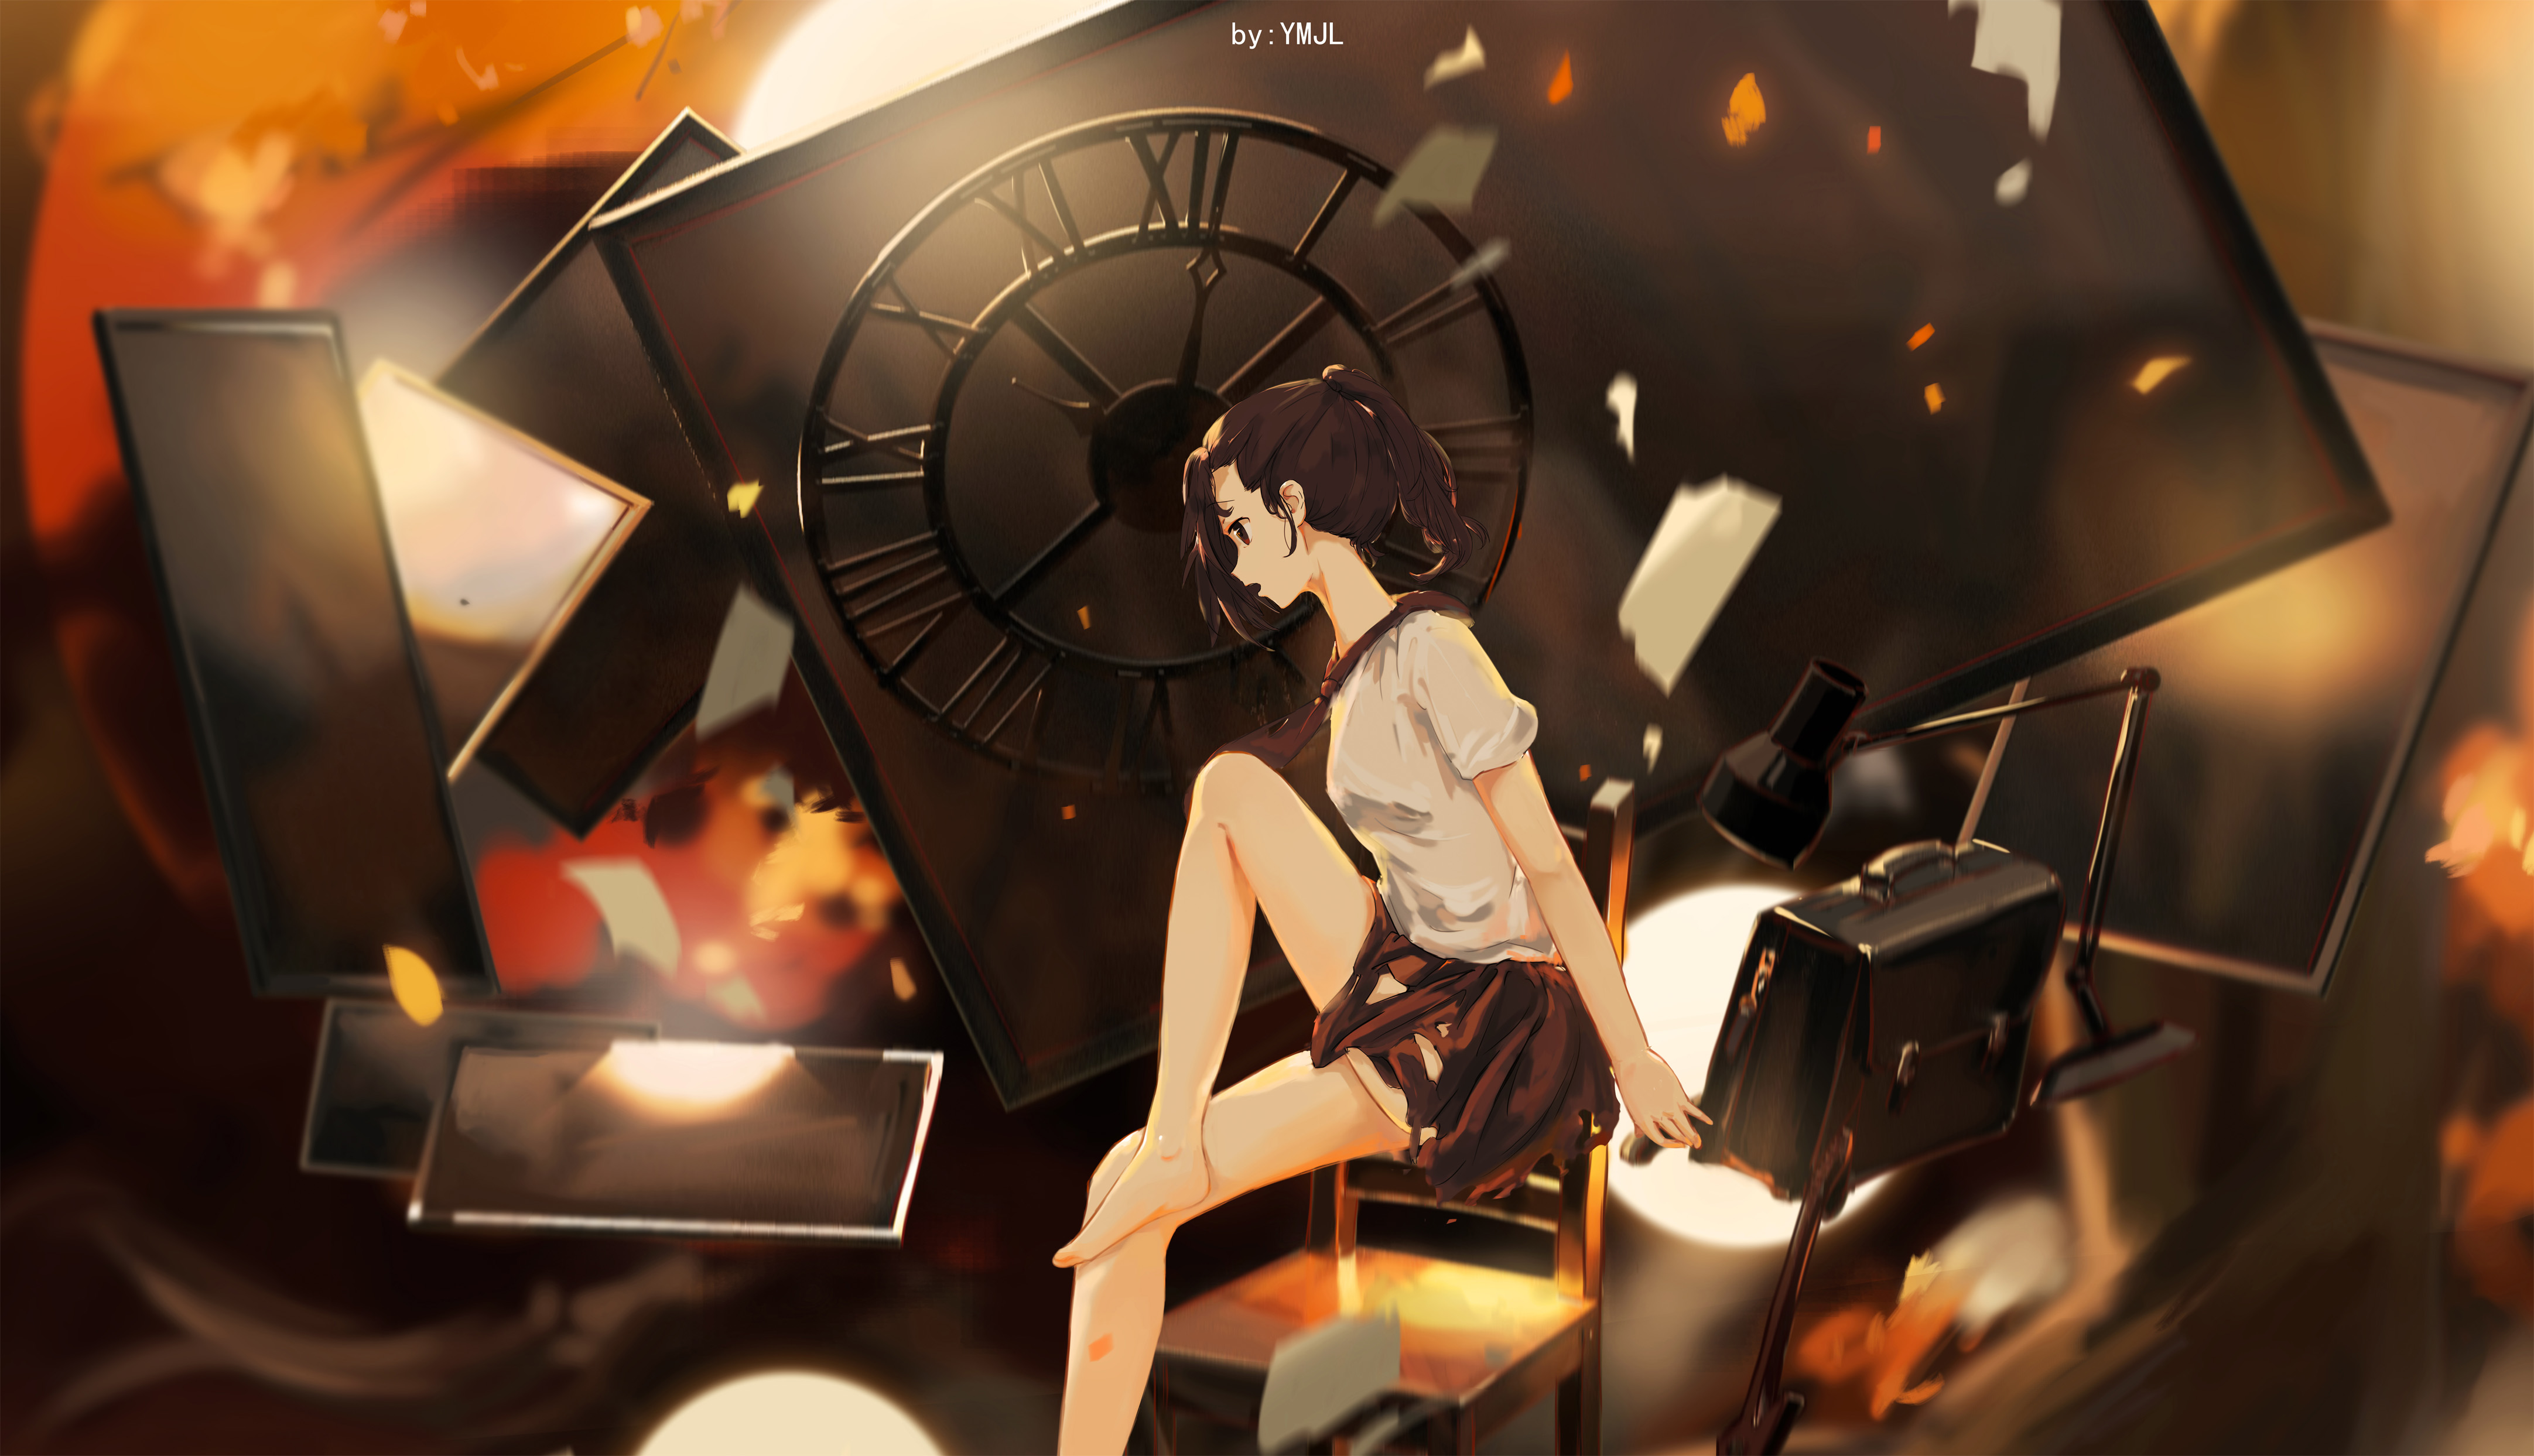 Anime 4327x2487 clocks chair guitar lamp books leaves side view anime girls open mouth ponytail schoolgirl school uniform time Roman numerals looking away luggage torn skirt torn clothes skirt short sleeves Y|M bent legs sitting brunette brown eyes